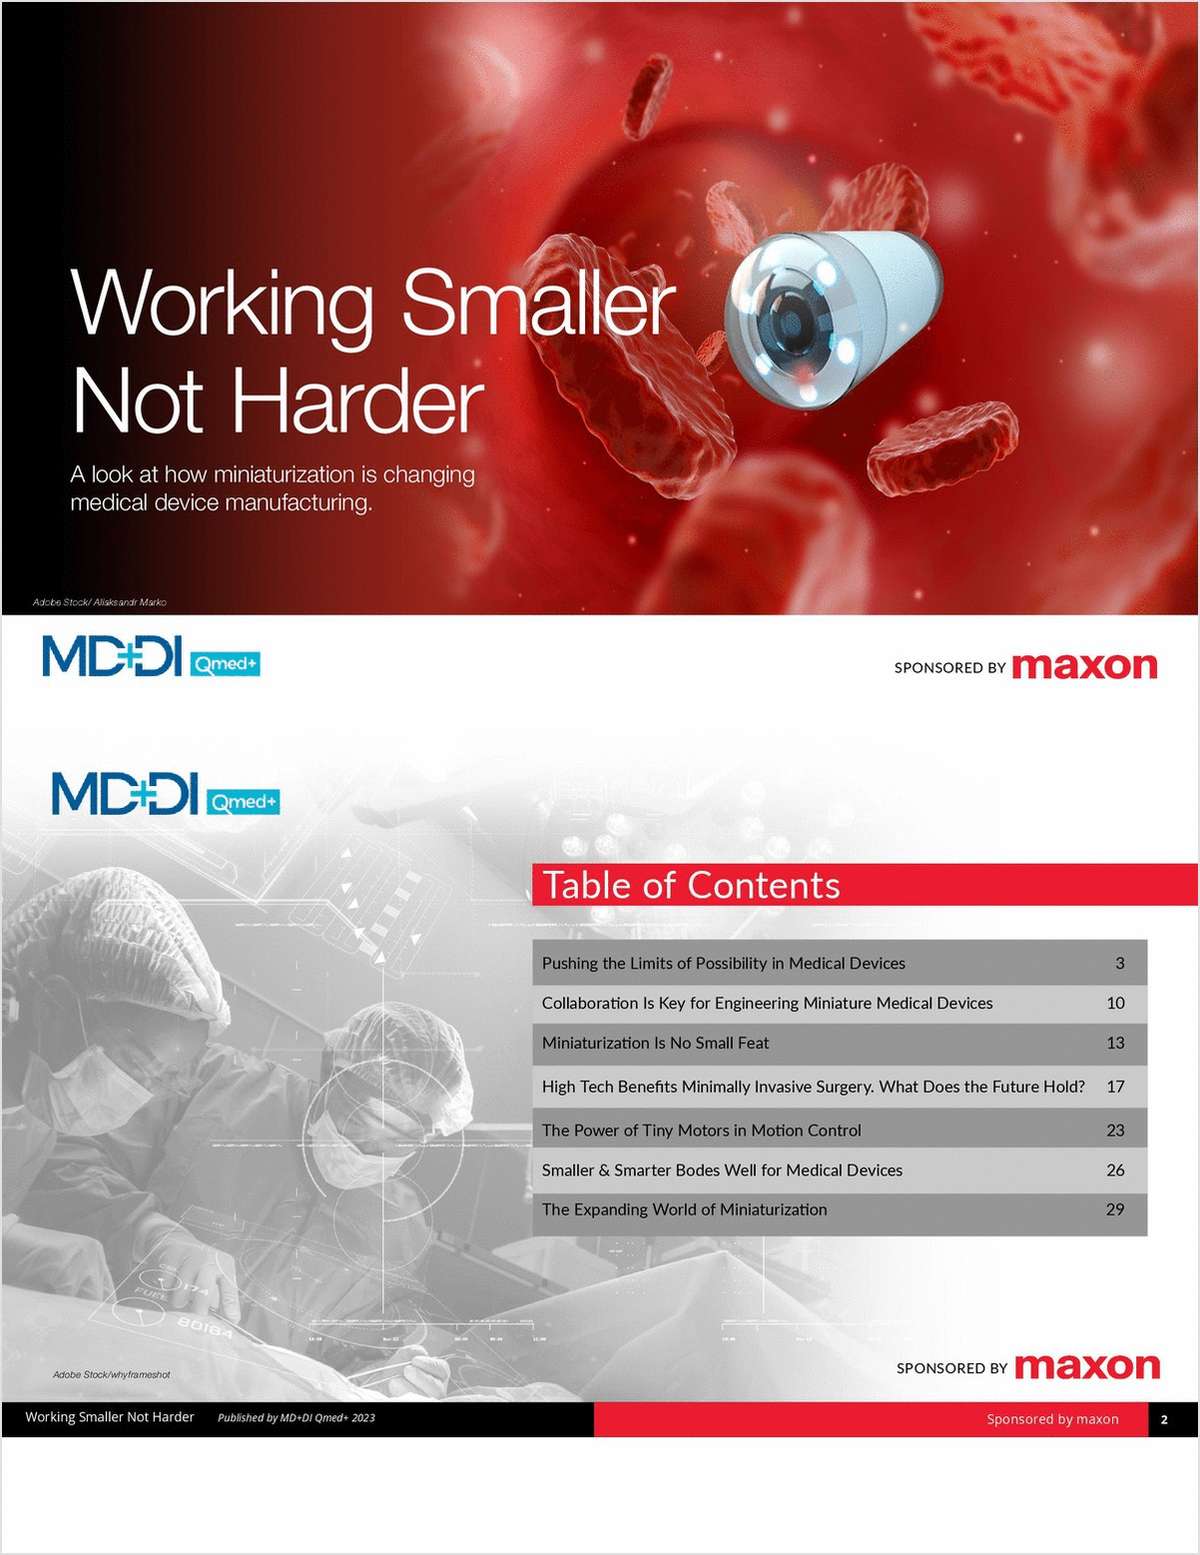 Working Smaller Not Harder  - A look at how miniaturization is changing medical device manufacturing.